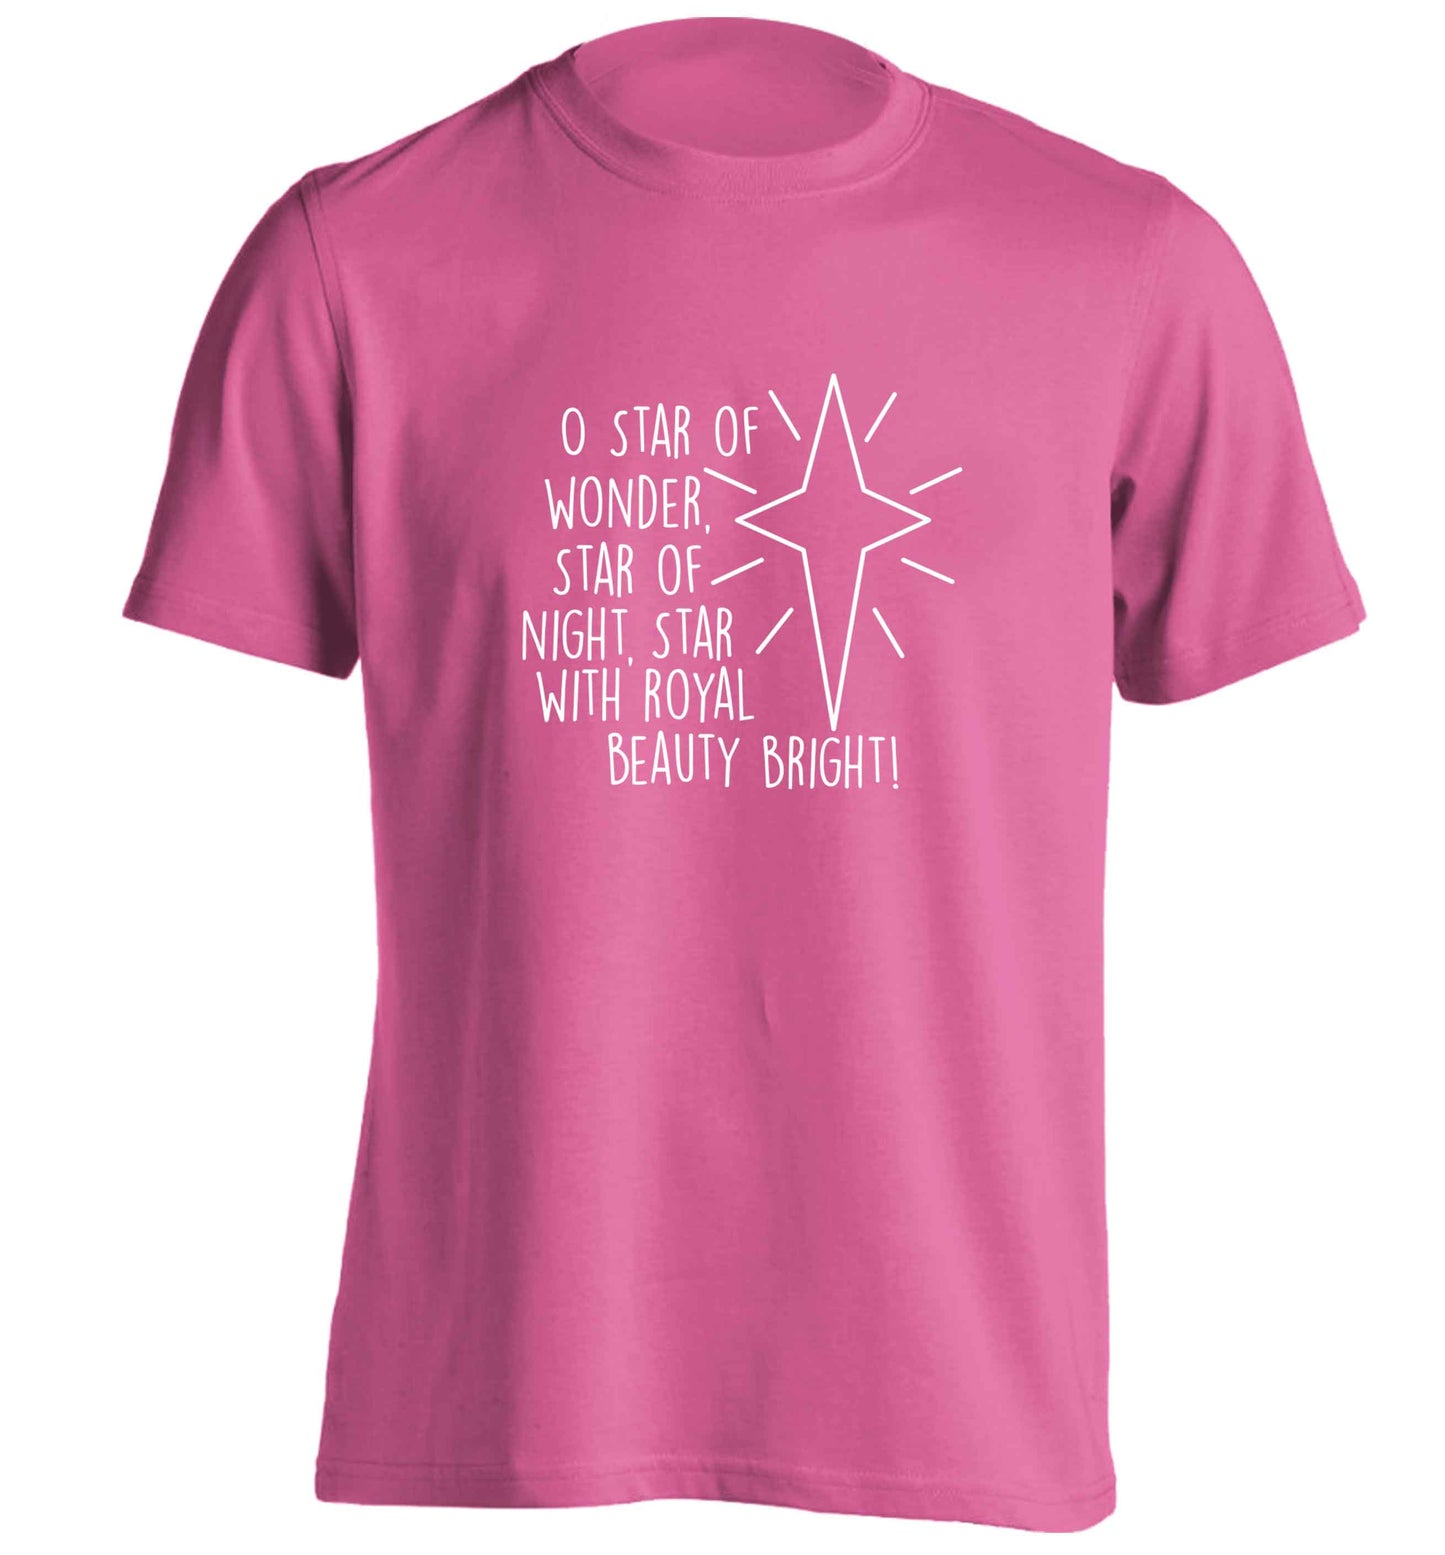 Oh star of wonder star of night, star with royal beauty bright adults unisex pink Tshirt 2XL